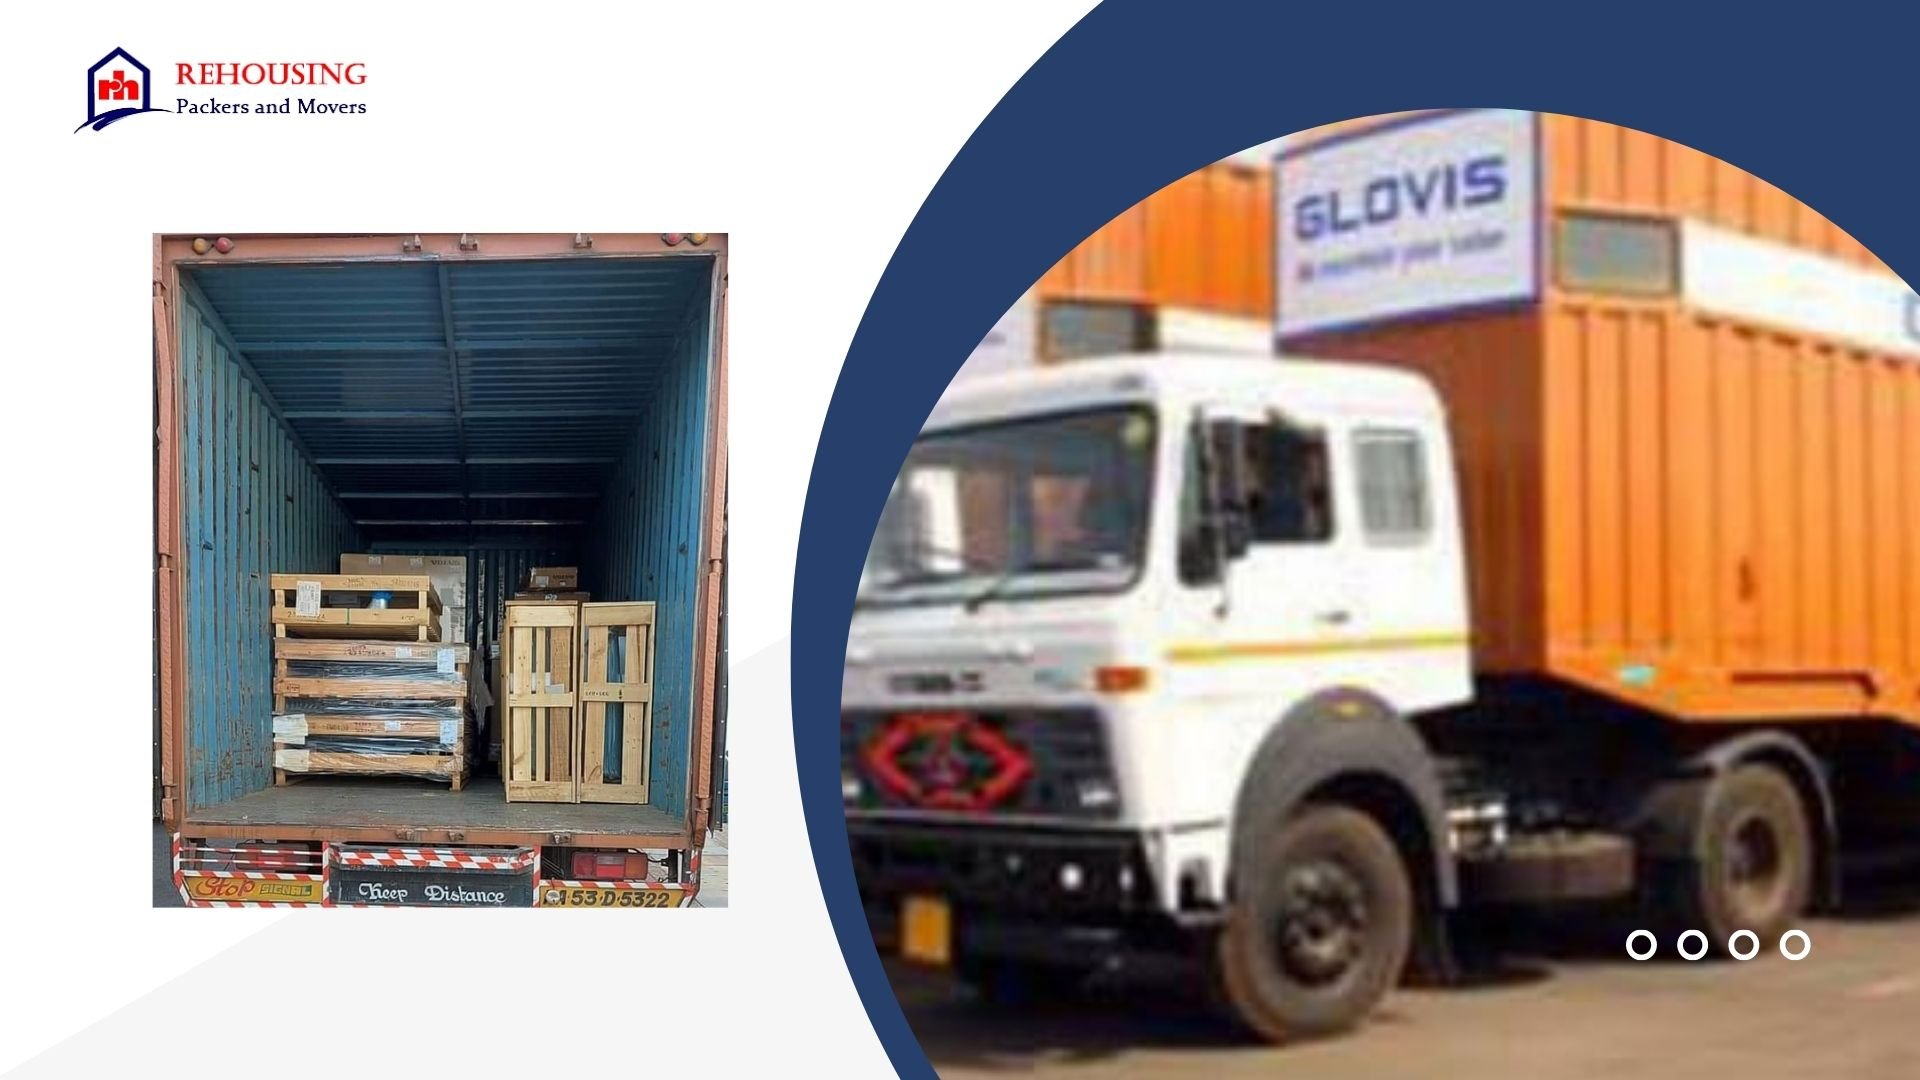 Packers and Movers From Dehradun to Guwahati | Rehousing packers and movers